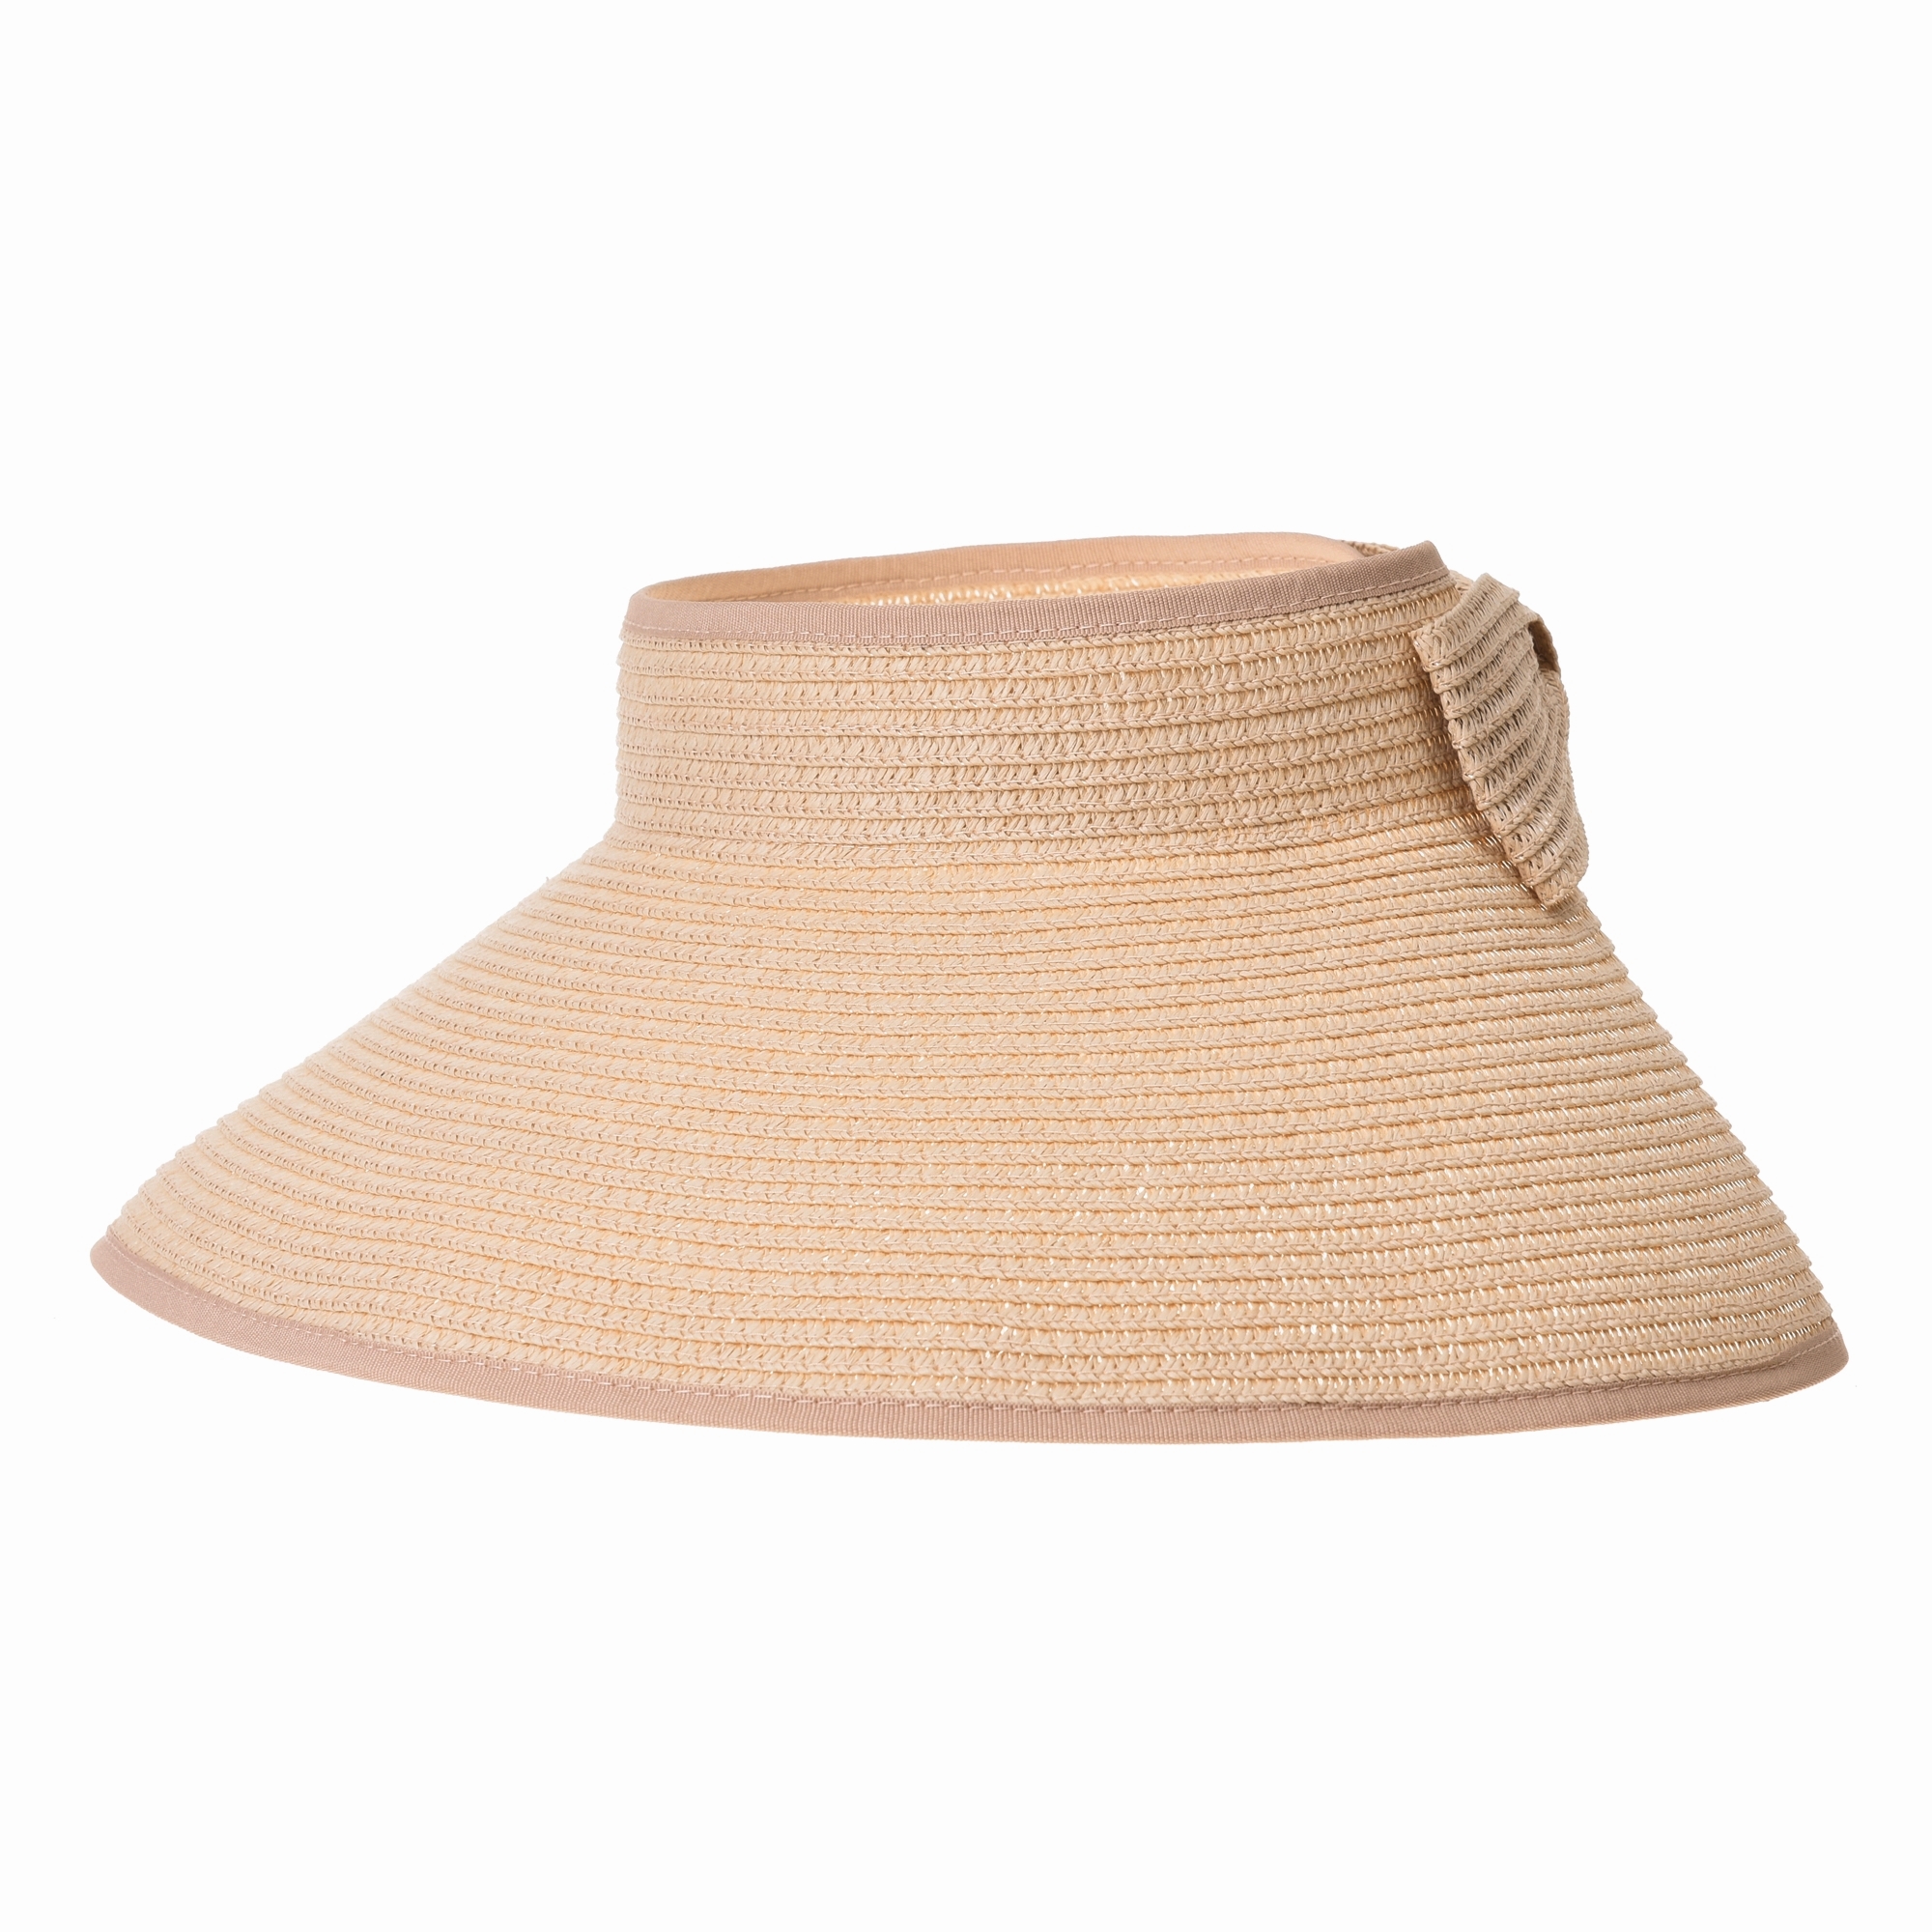 WITHMOONS Womens Sun Visor Packable Wide Brim Roll-Up Beach Straw Hat ...